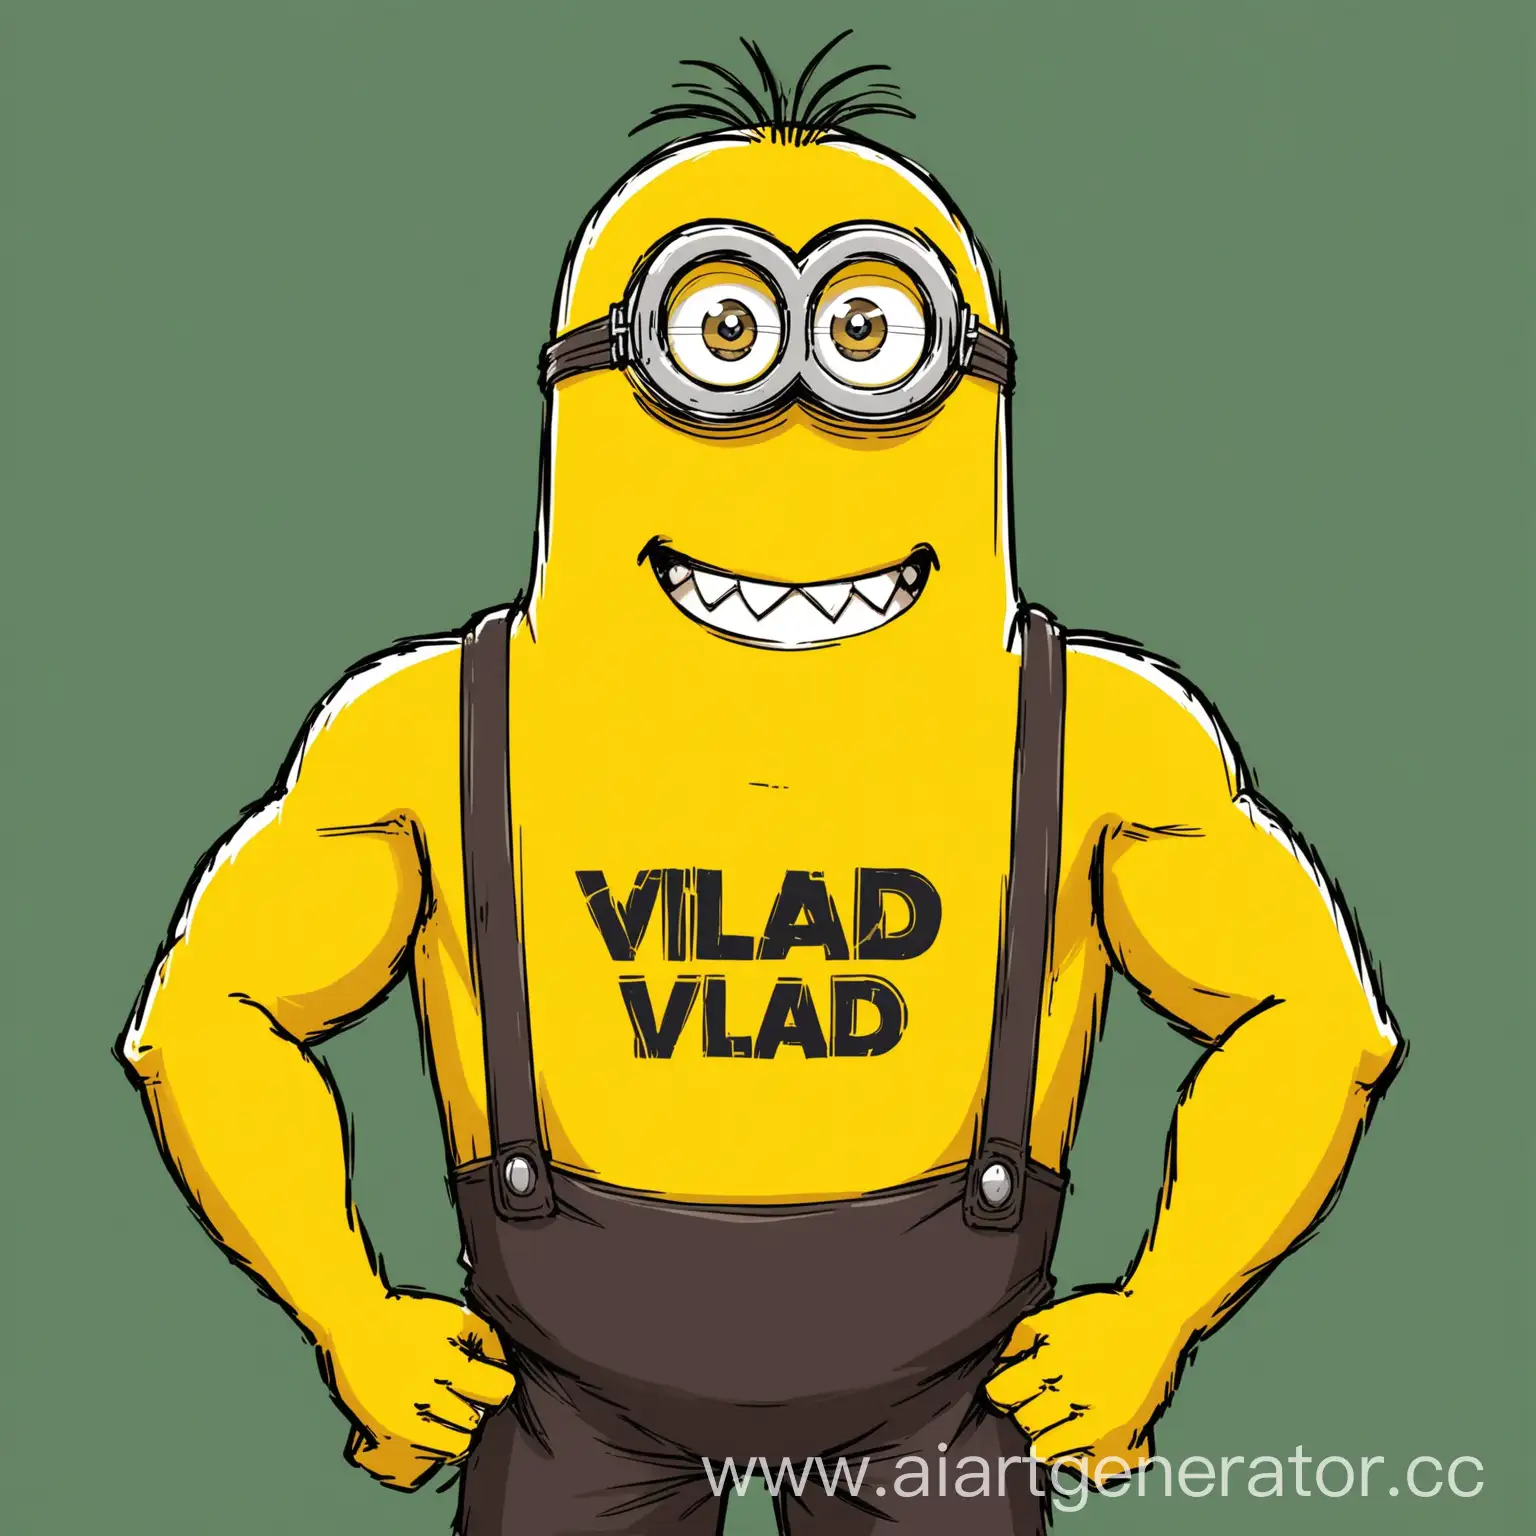 A muscular yellow Minion wearing a T-shirt with 'Vlad' written on it